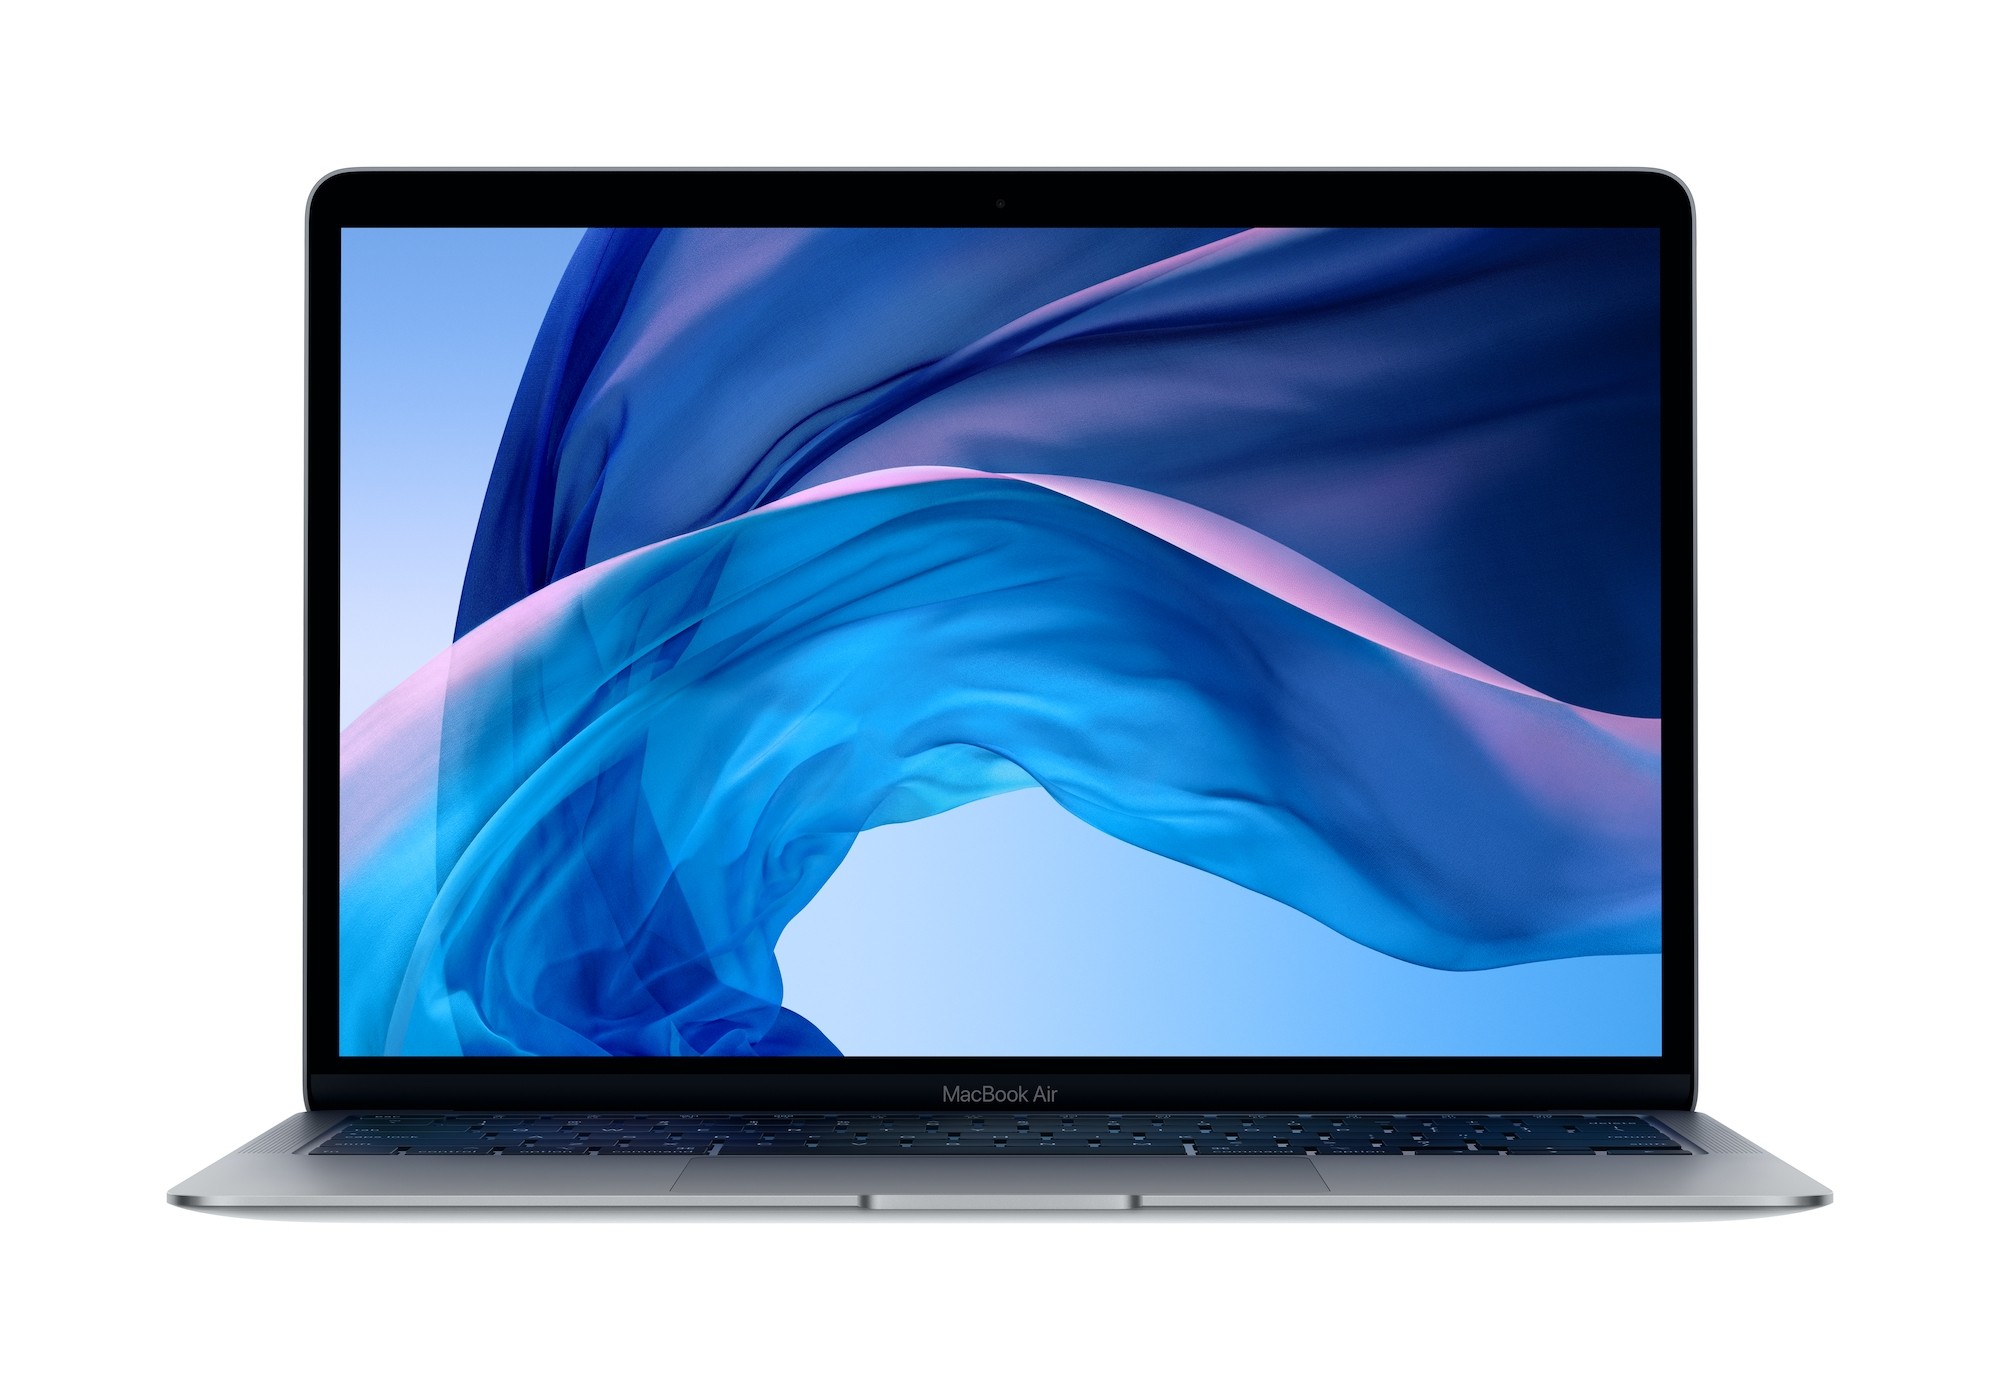 Get A Refurbished MacBook Air For Just $339.97